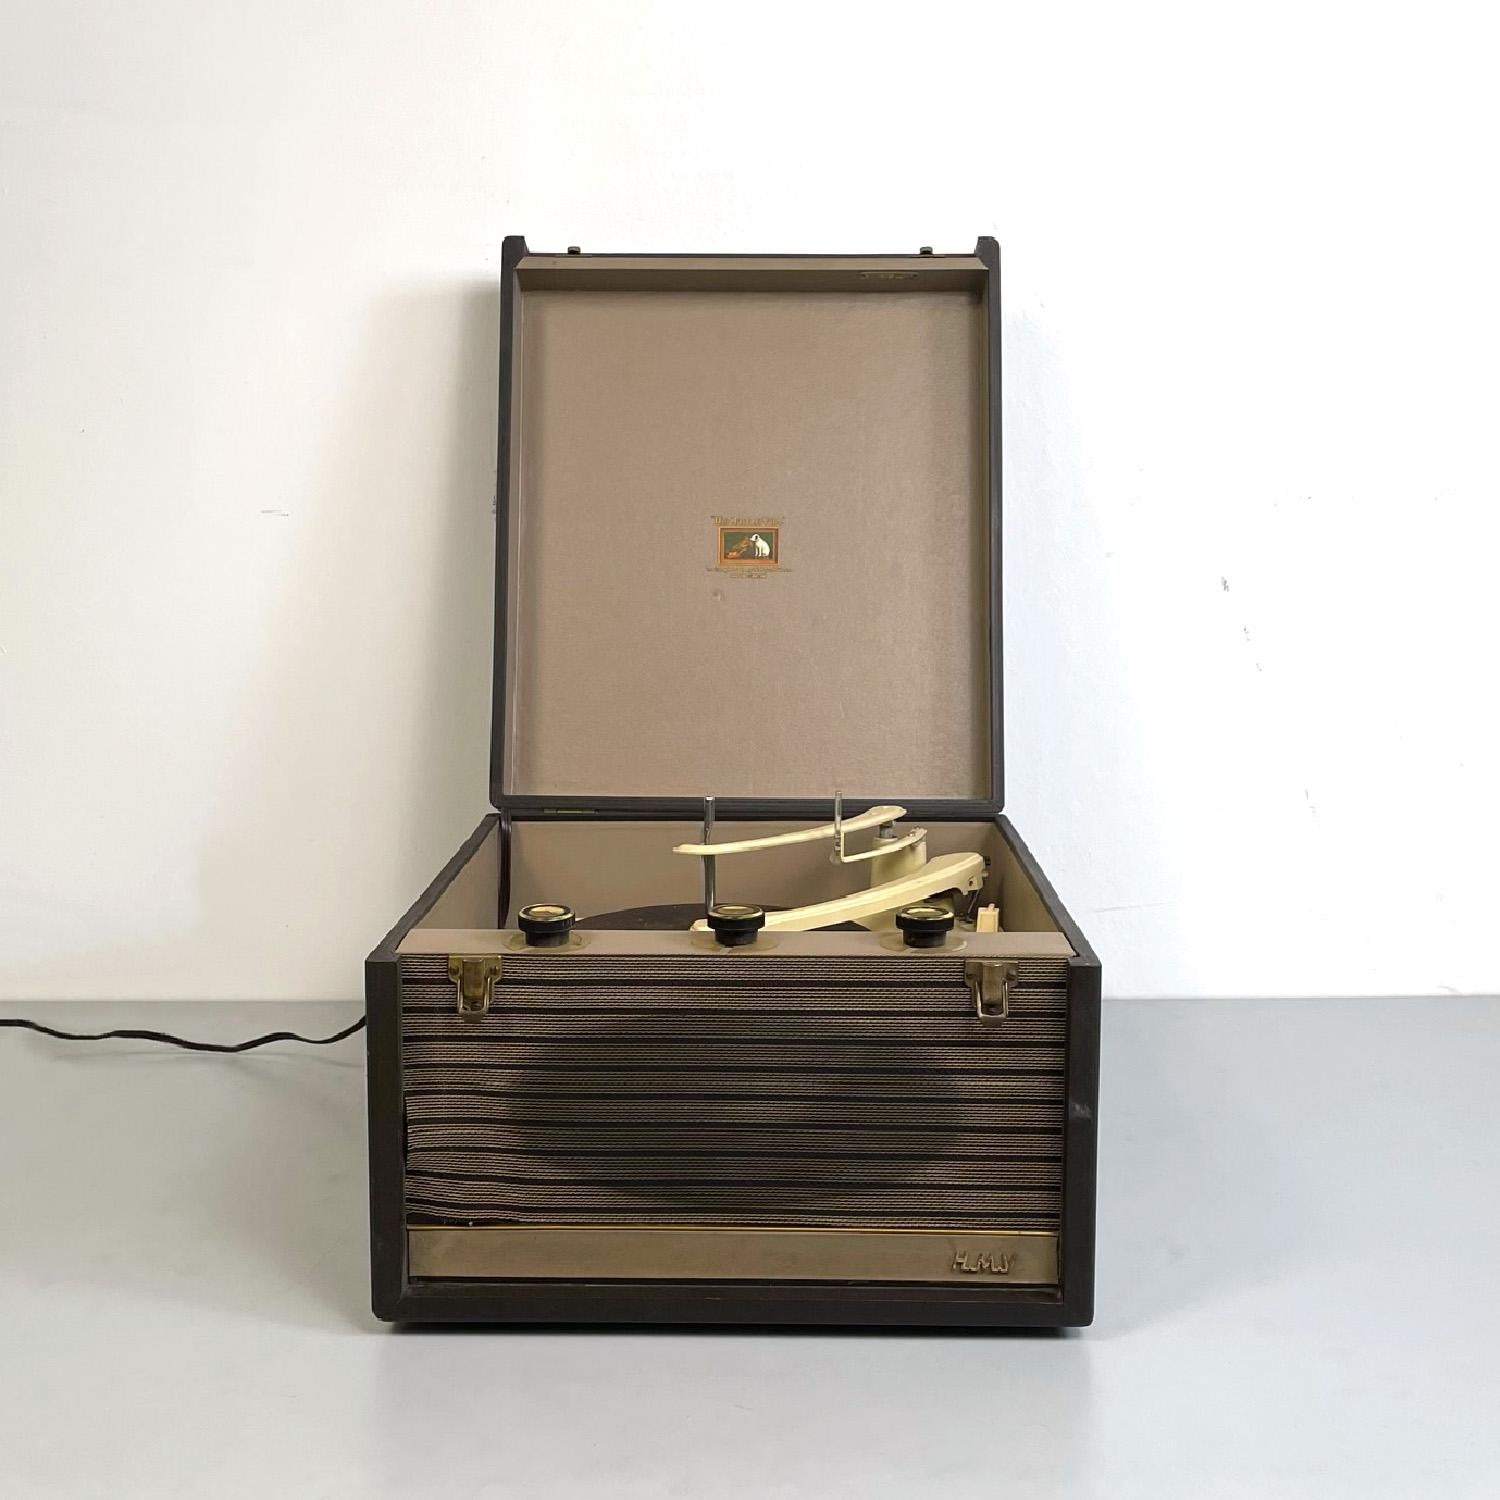 English mid-century modern vinyl record player case by His Master's Voice, 1950s
Rectangular case vinyl record player. Structure in dark and light brown wood. The record player part is located inside the case, along with its different components.